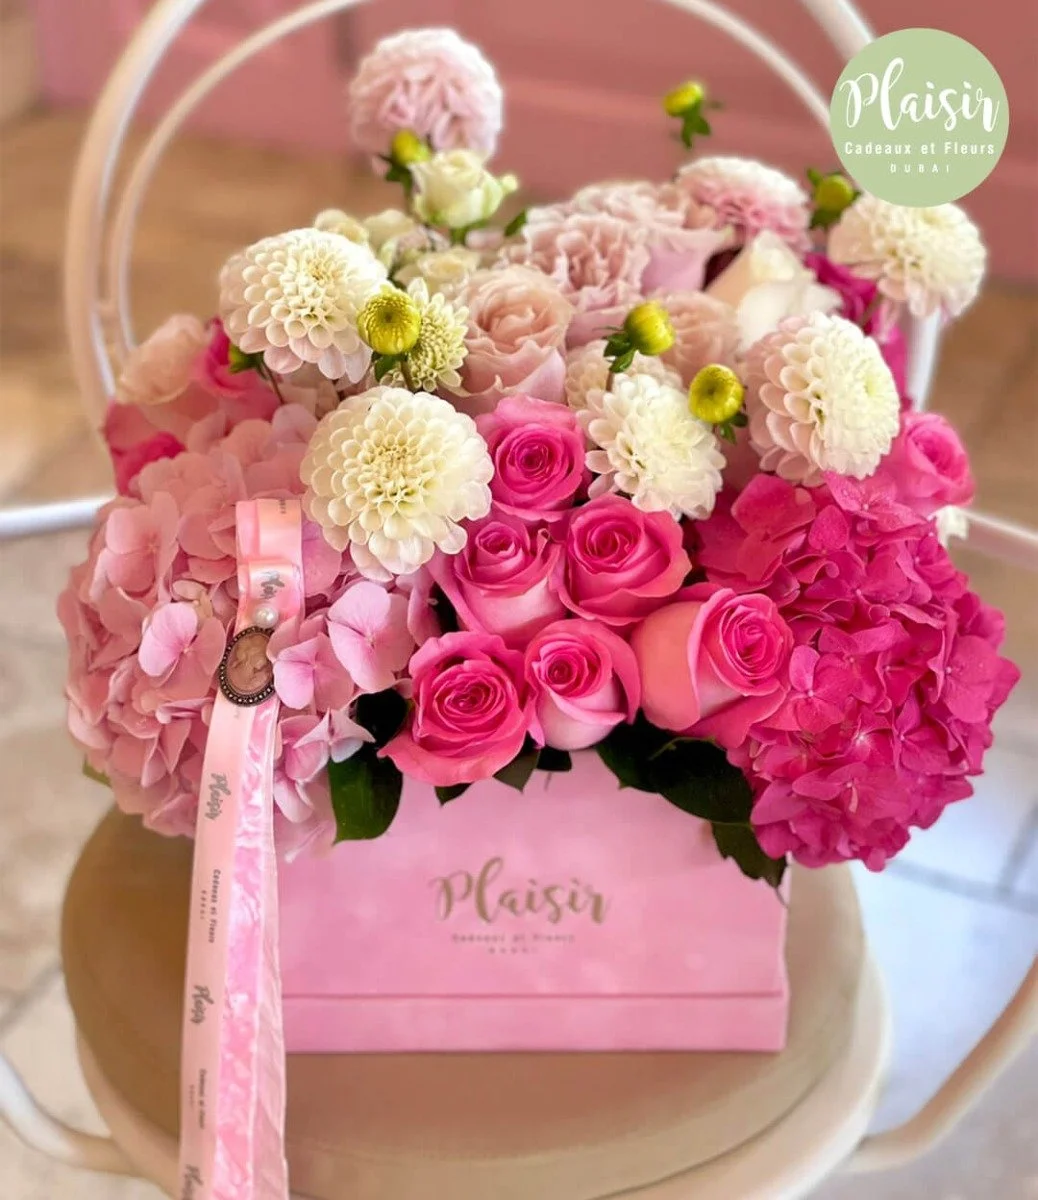 Pink Carée with Soft Pink Flowers By Plaisir